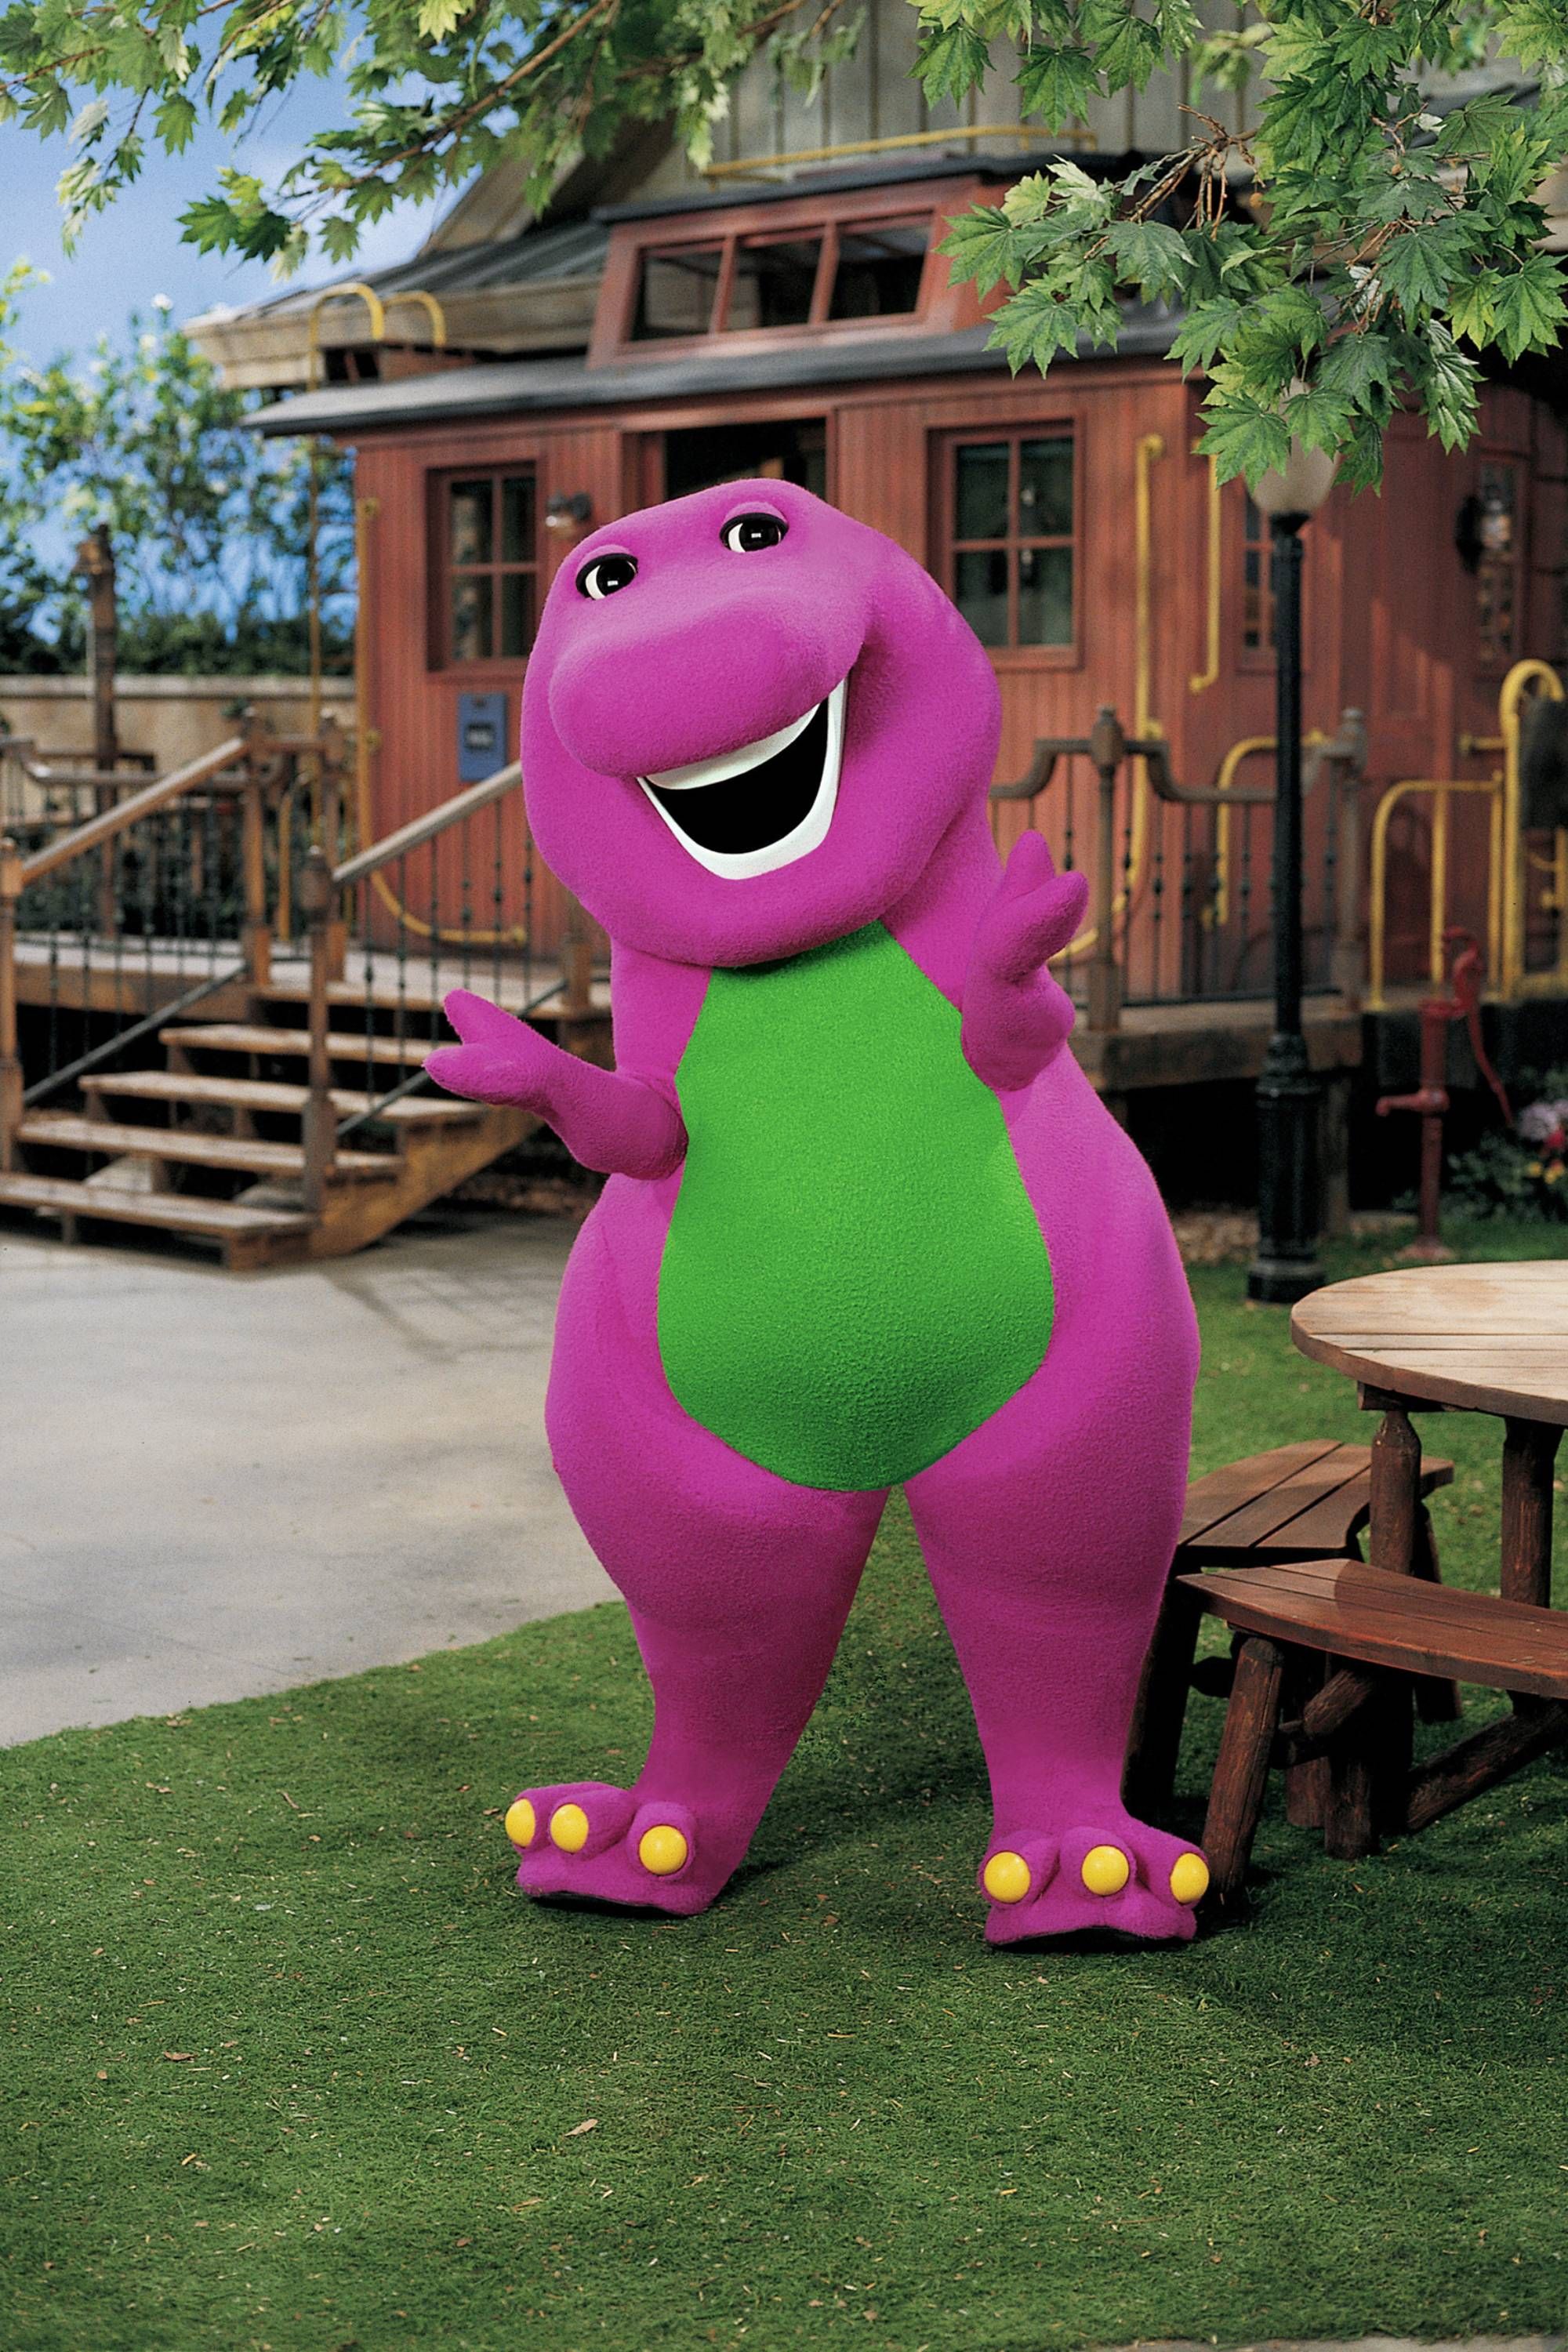 Soft And Cuddly 30cm Purple Dinosaur Barney Barney Plush Perfect Gift For  Kids And Children Item #231007 From Deng08, $10.32 | DHgate.Com